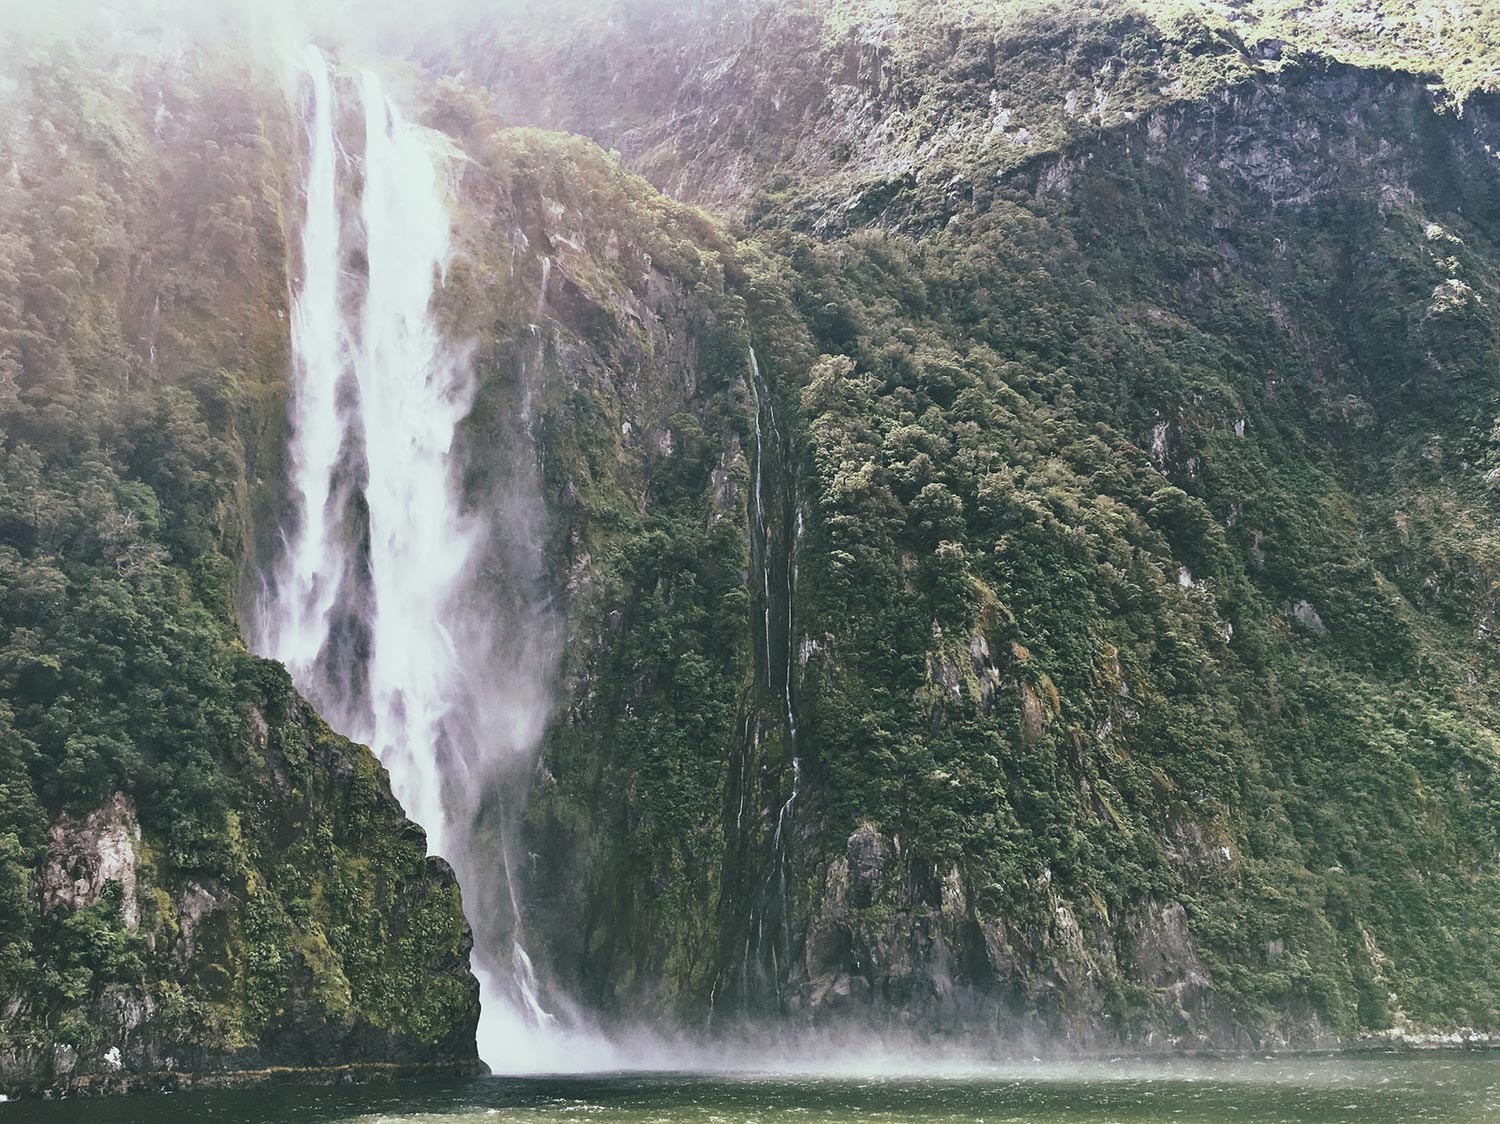 Day 4: Milford Sounds Day Excursion